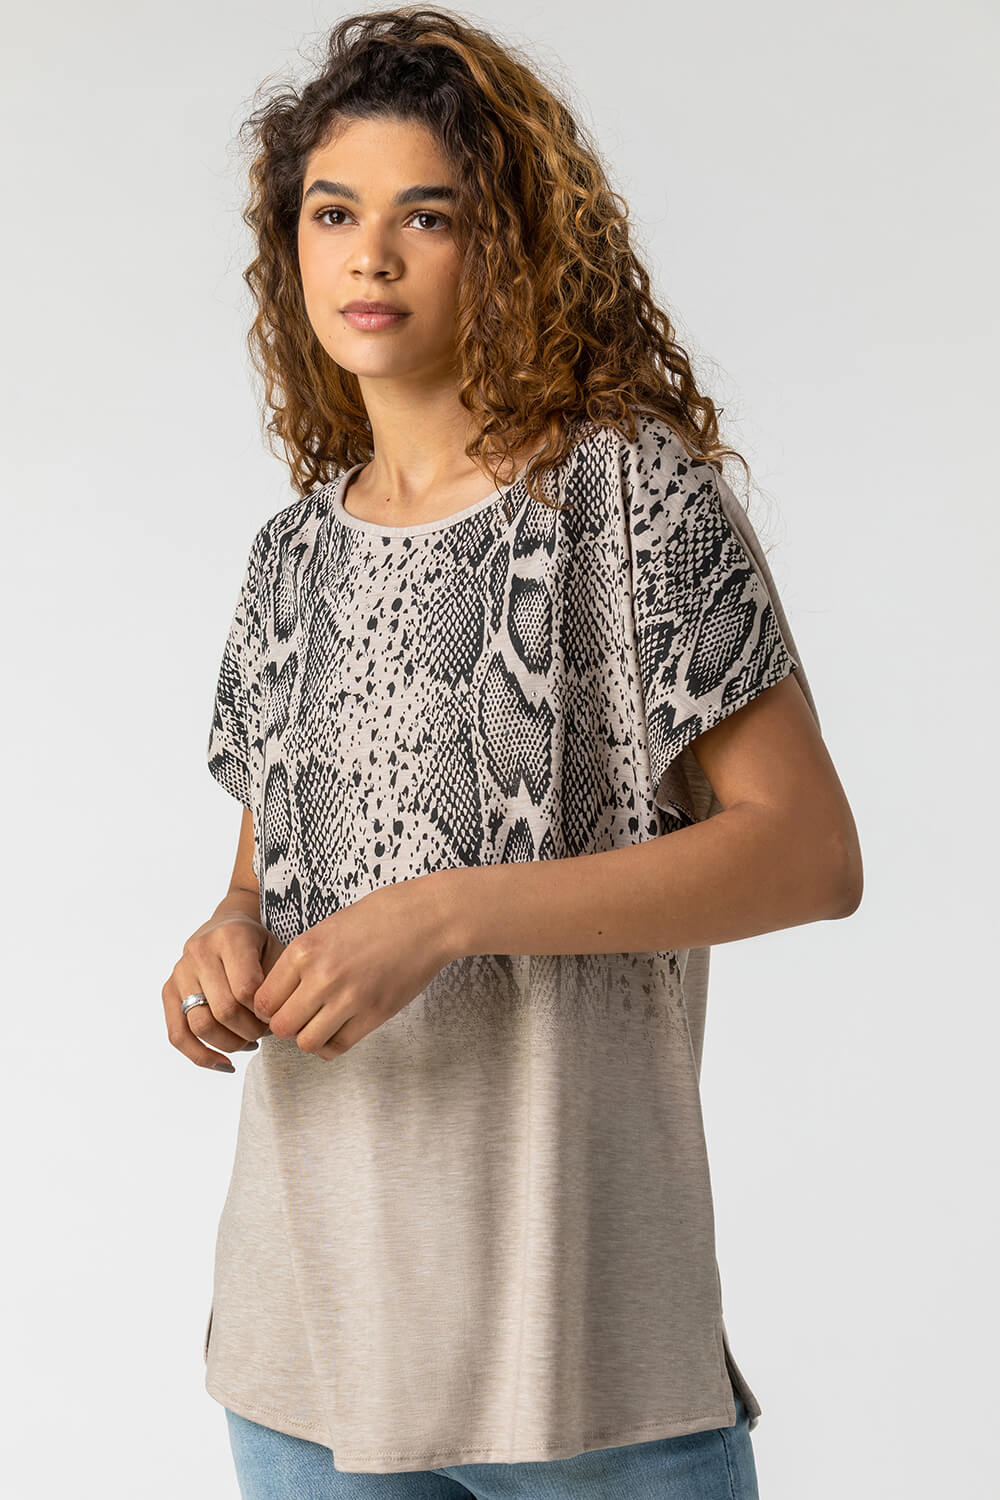 Neutral Snake Print Ombre Top, Image 4 of 5